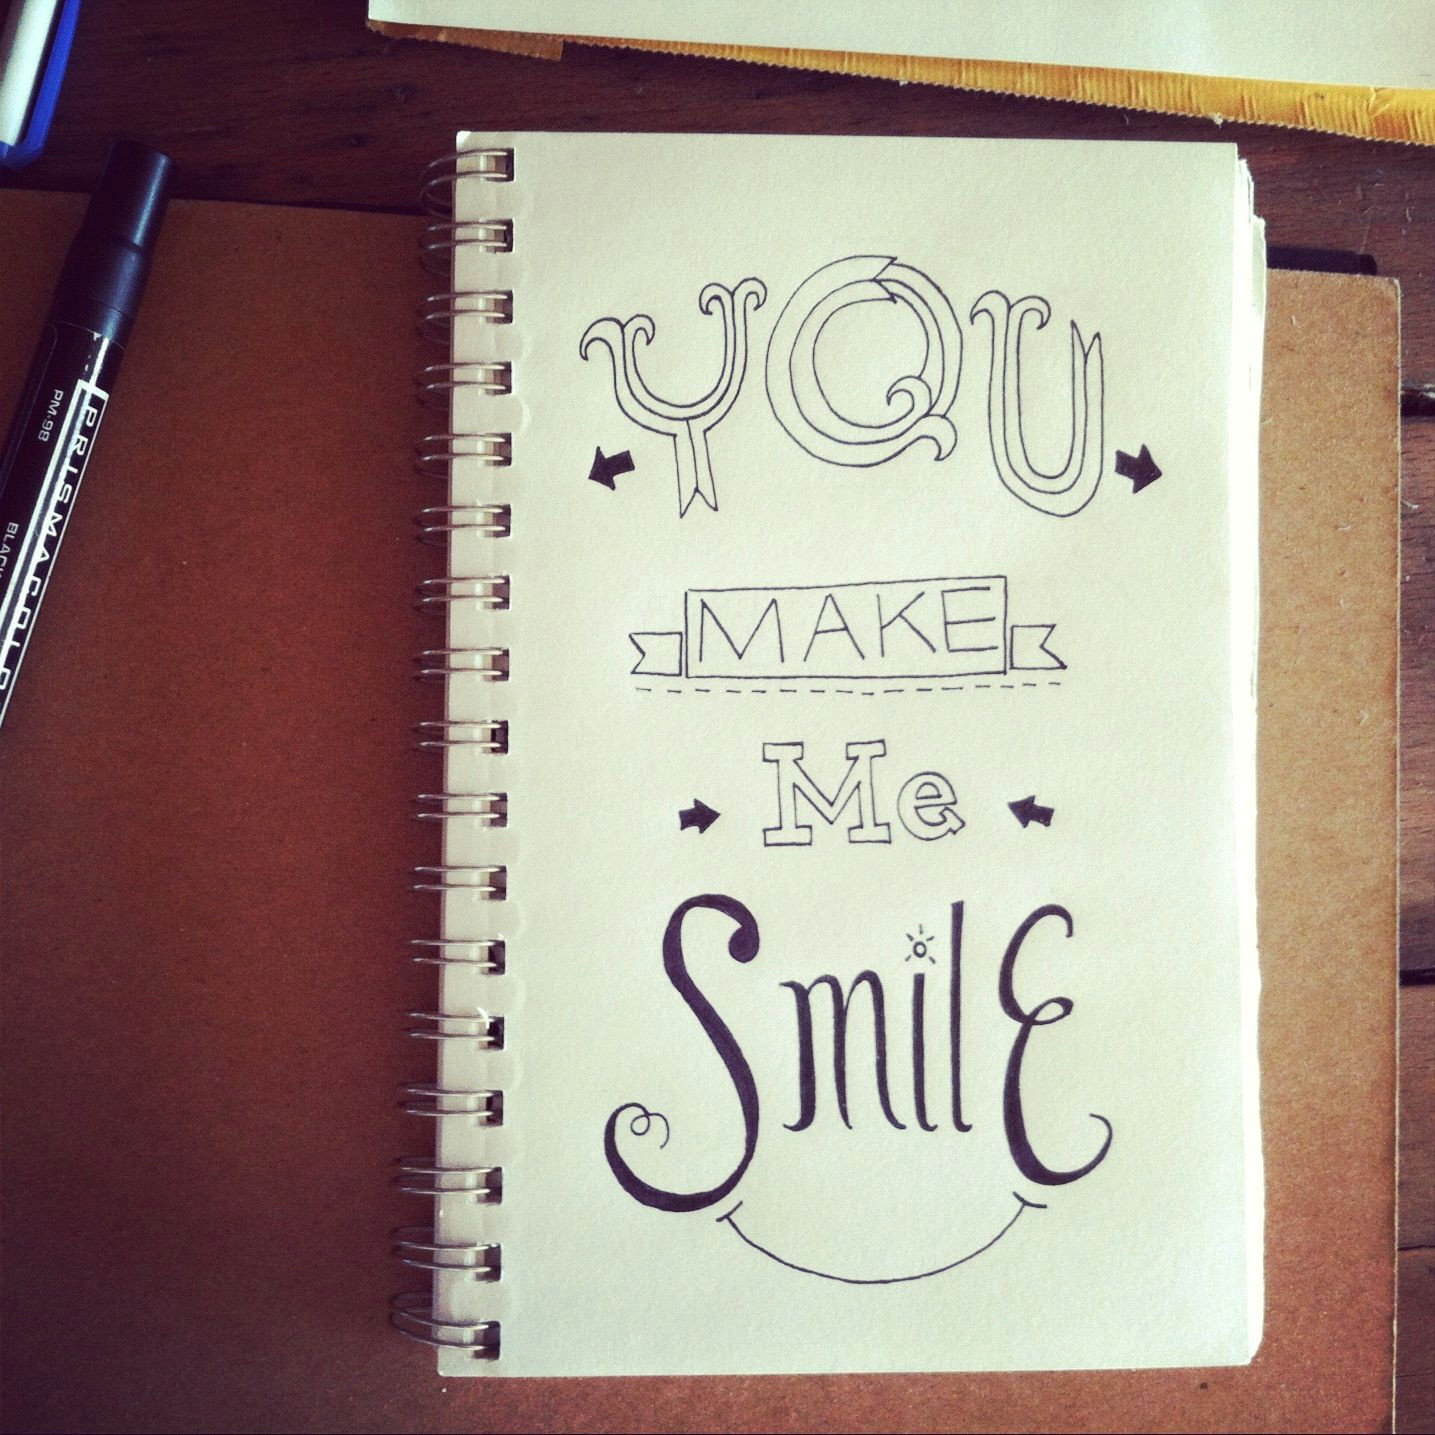 Drawing Quotes Easy You Make Me Smile A Doodle I Did for A Doodle A Day Project On